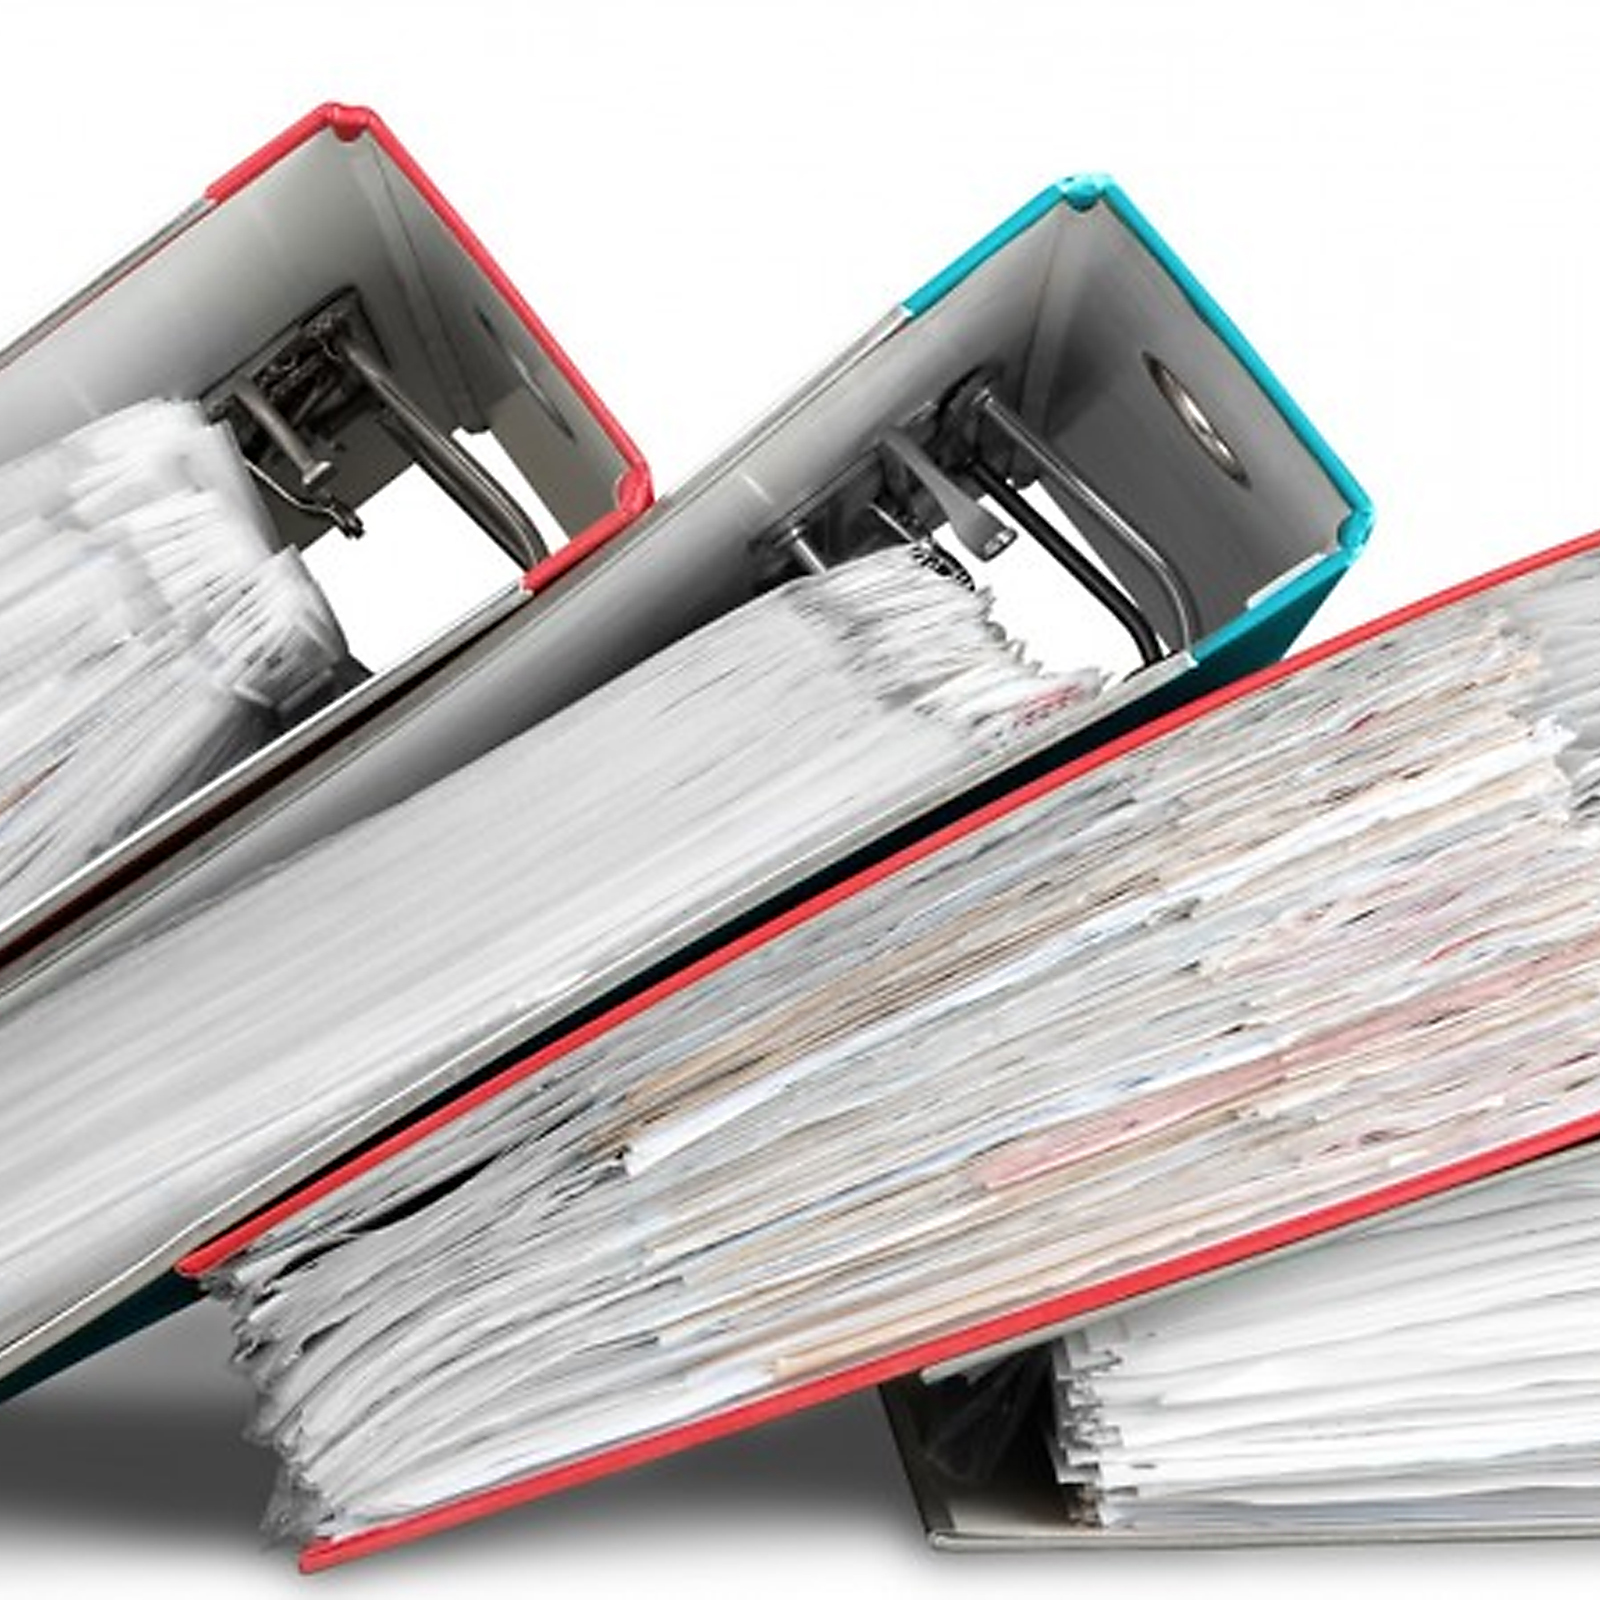 Document Preparation and Document Scanning